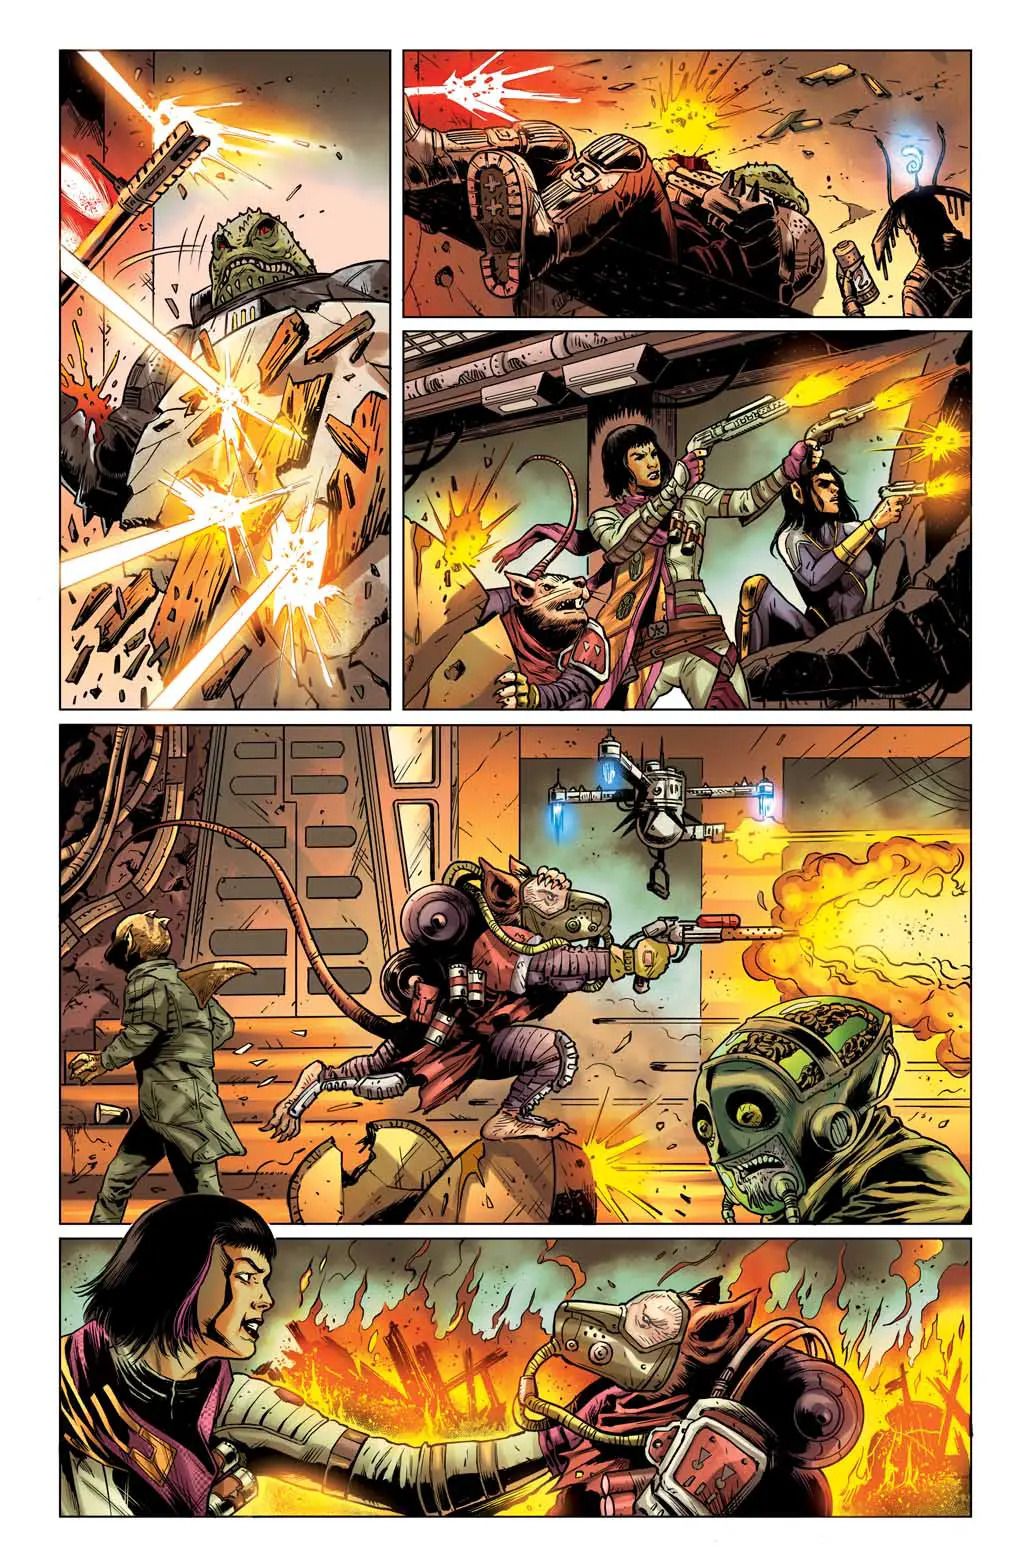 There's a gun battle in Starfinder Angels of the Drift #1 Page 7